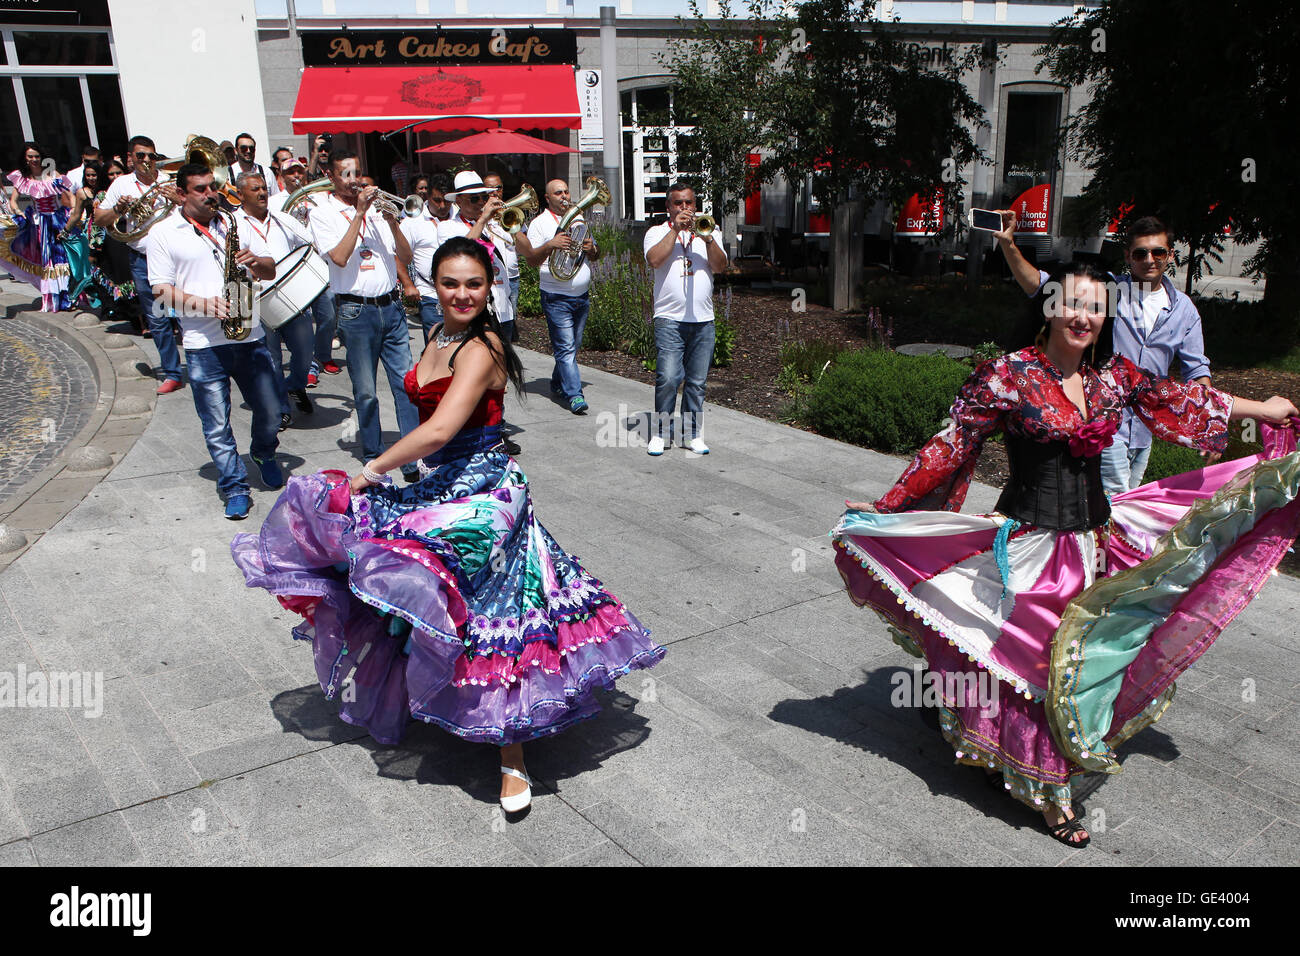 Bratislava, Slovakia. 23rd July, 2016. Gypsy artists in traditional  costumes perform at the street during the 9th 